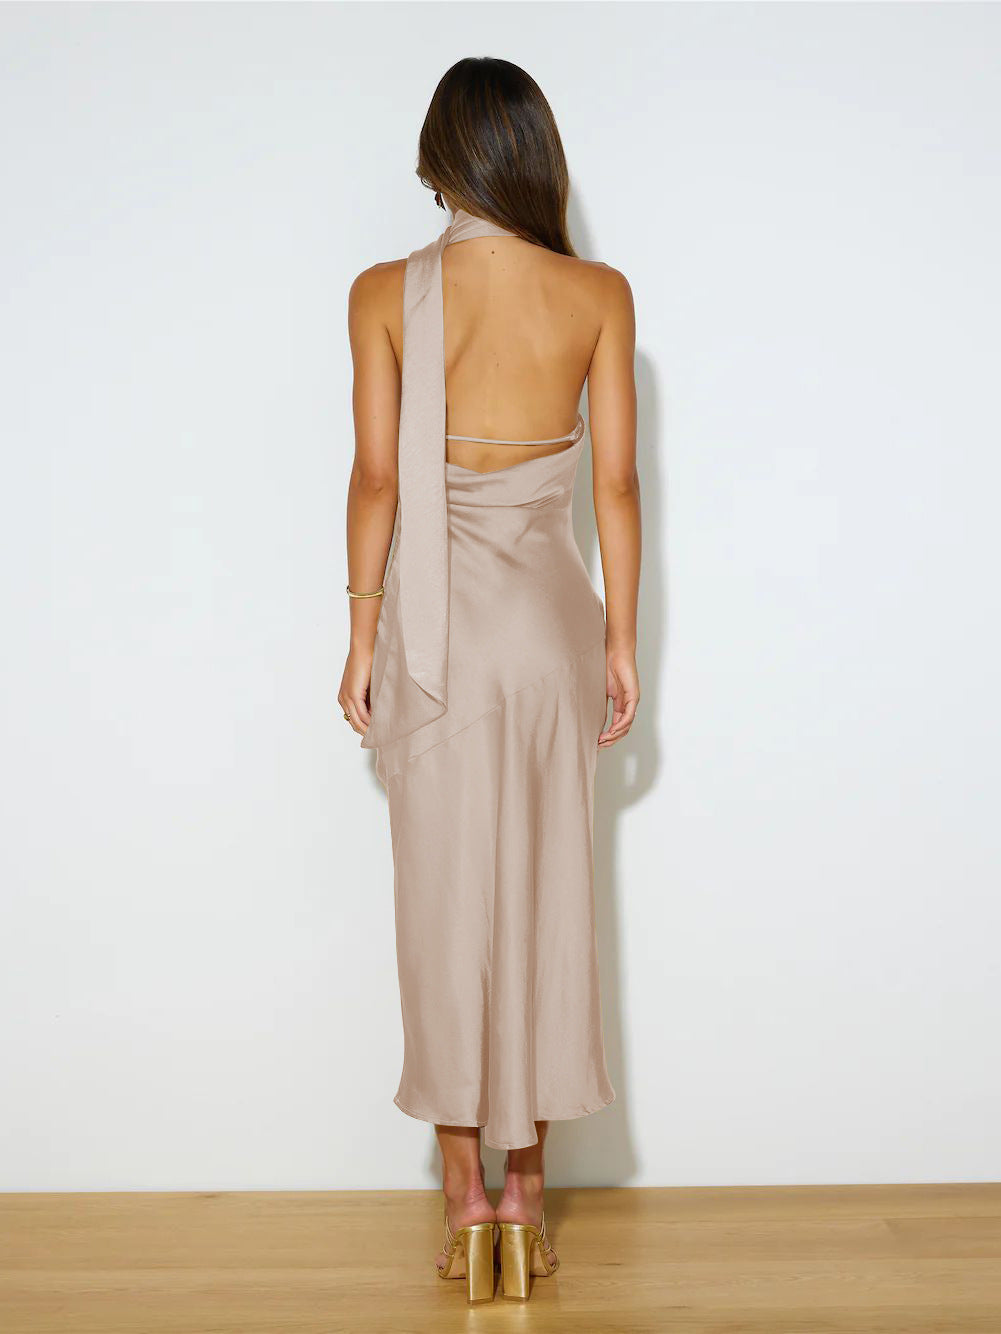 Sexy Satin Backless Evening Dresses